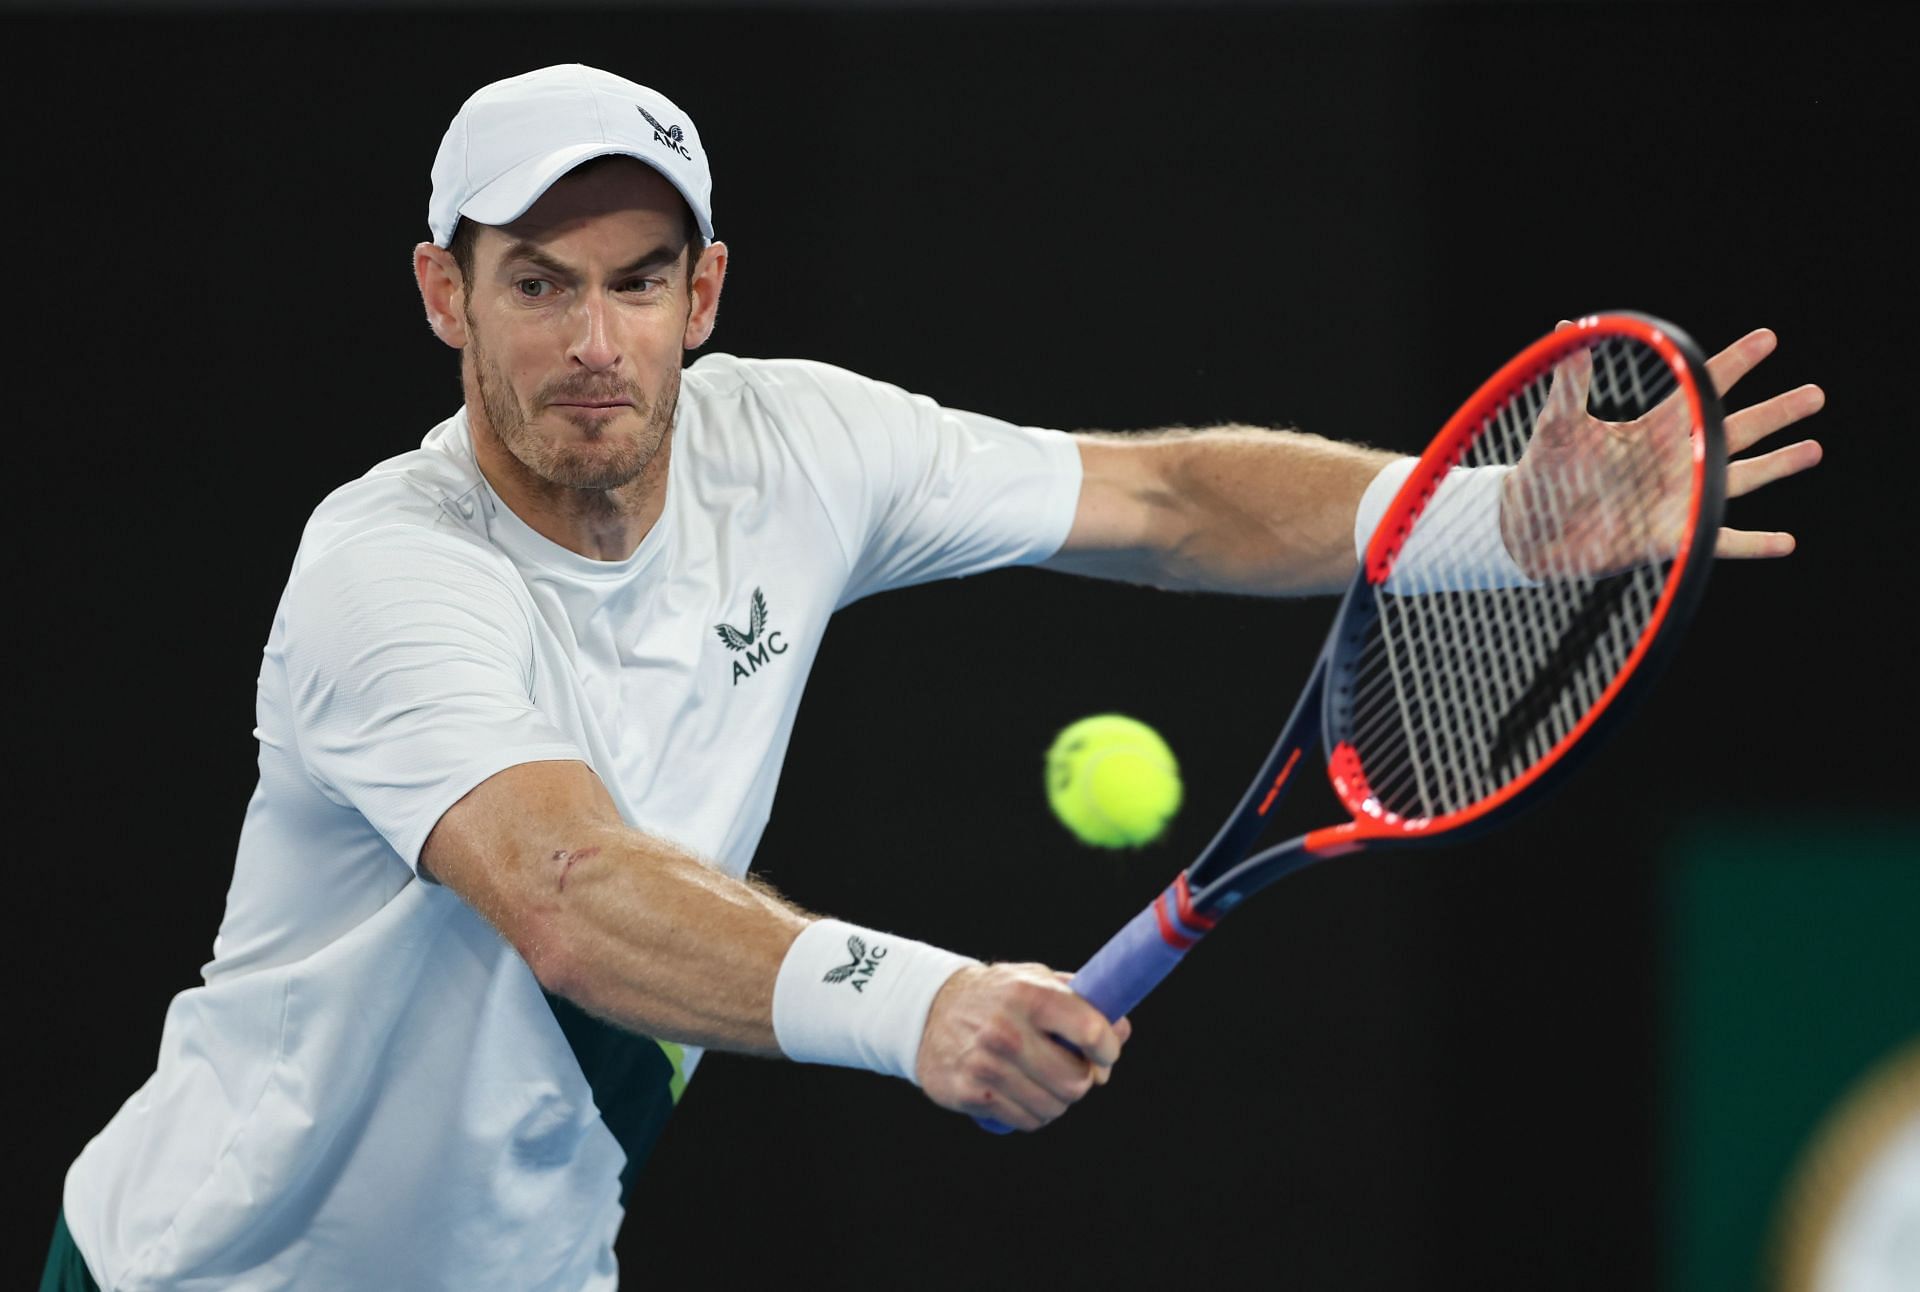 Andy Murray pictured at the 2023 Australian Open - Day 4.